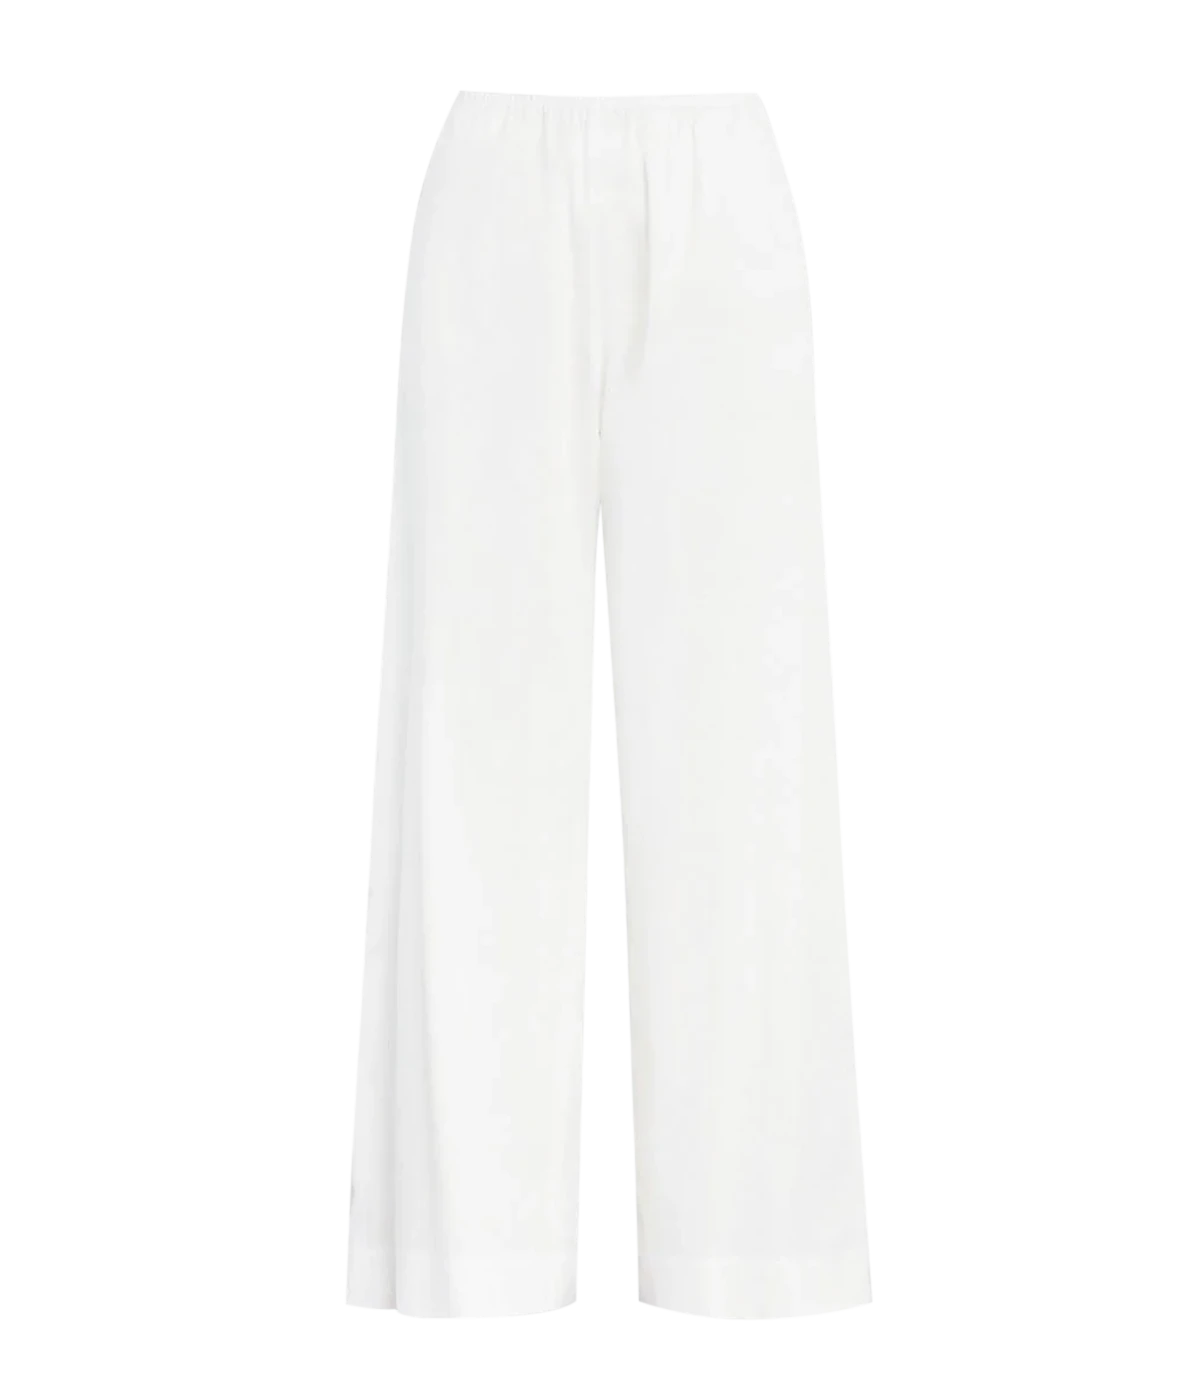 100% crisp cotton lounge pants, effortless and easy with an elasticated waist band, side seem pockets. Comfortable, everyday pant, best selling, made internationally.